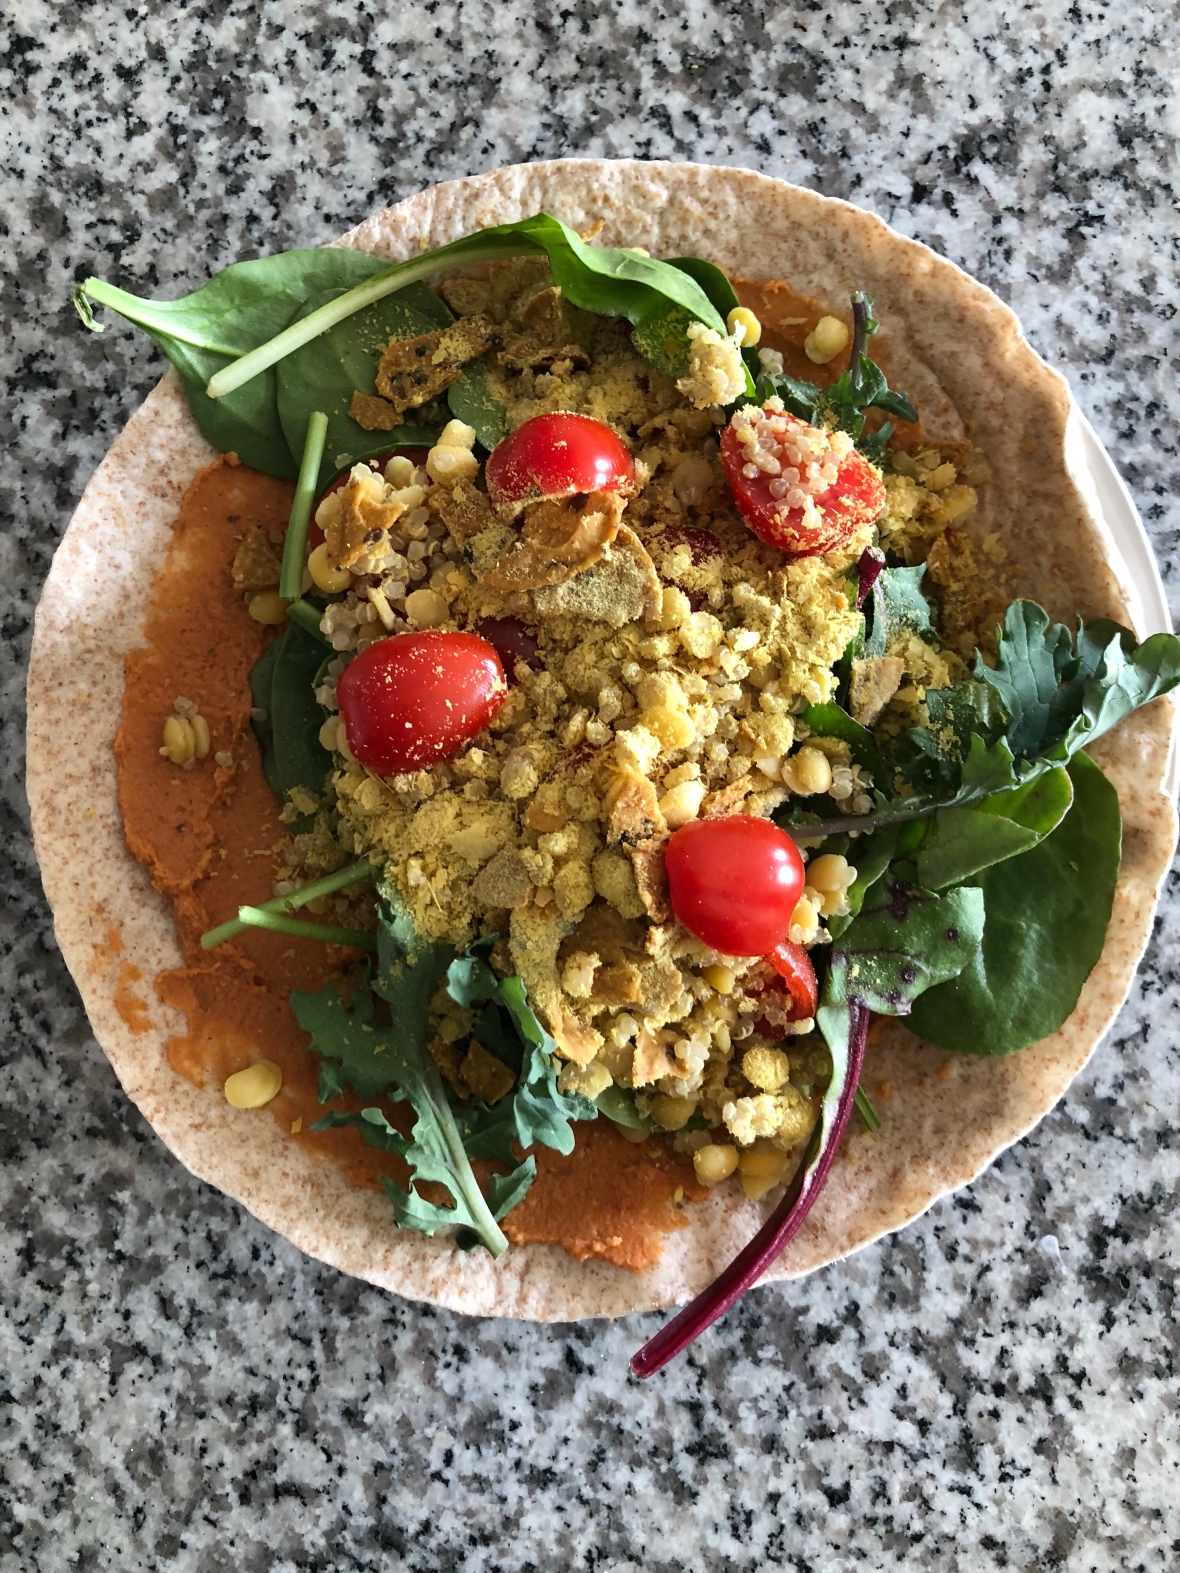 Steve and I have enjoyed finding new plant based meals. He has started making homemade hummus for us which is a staple in most every meal for me